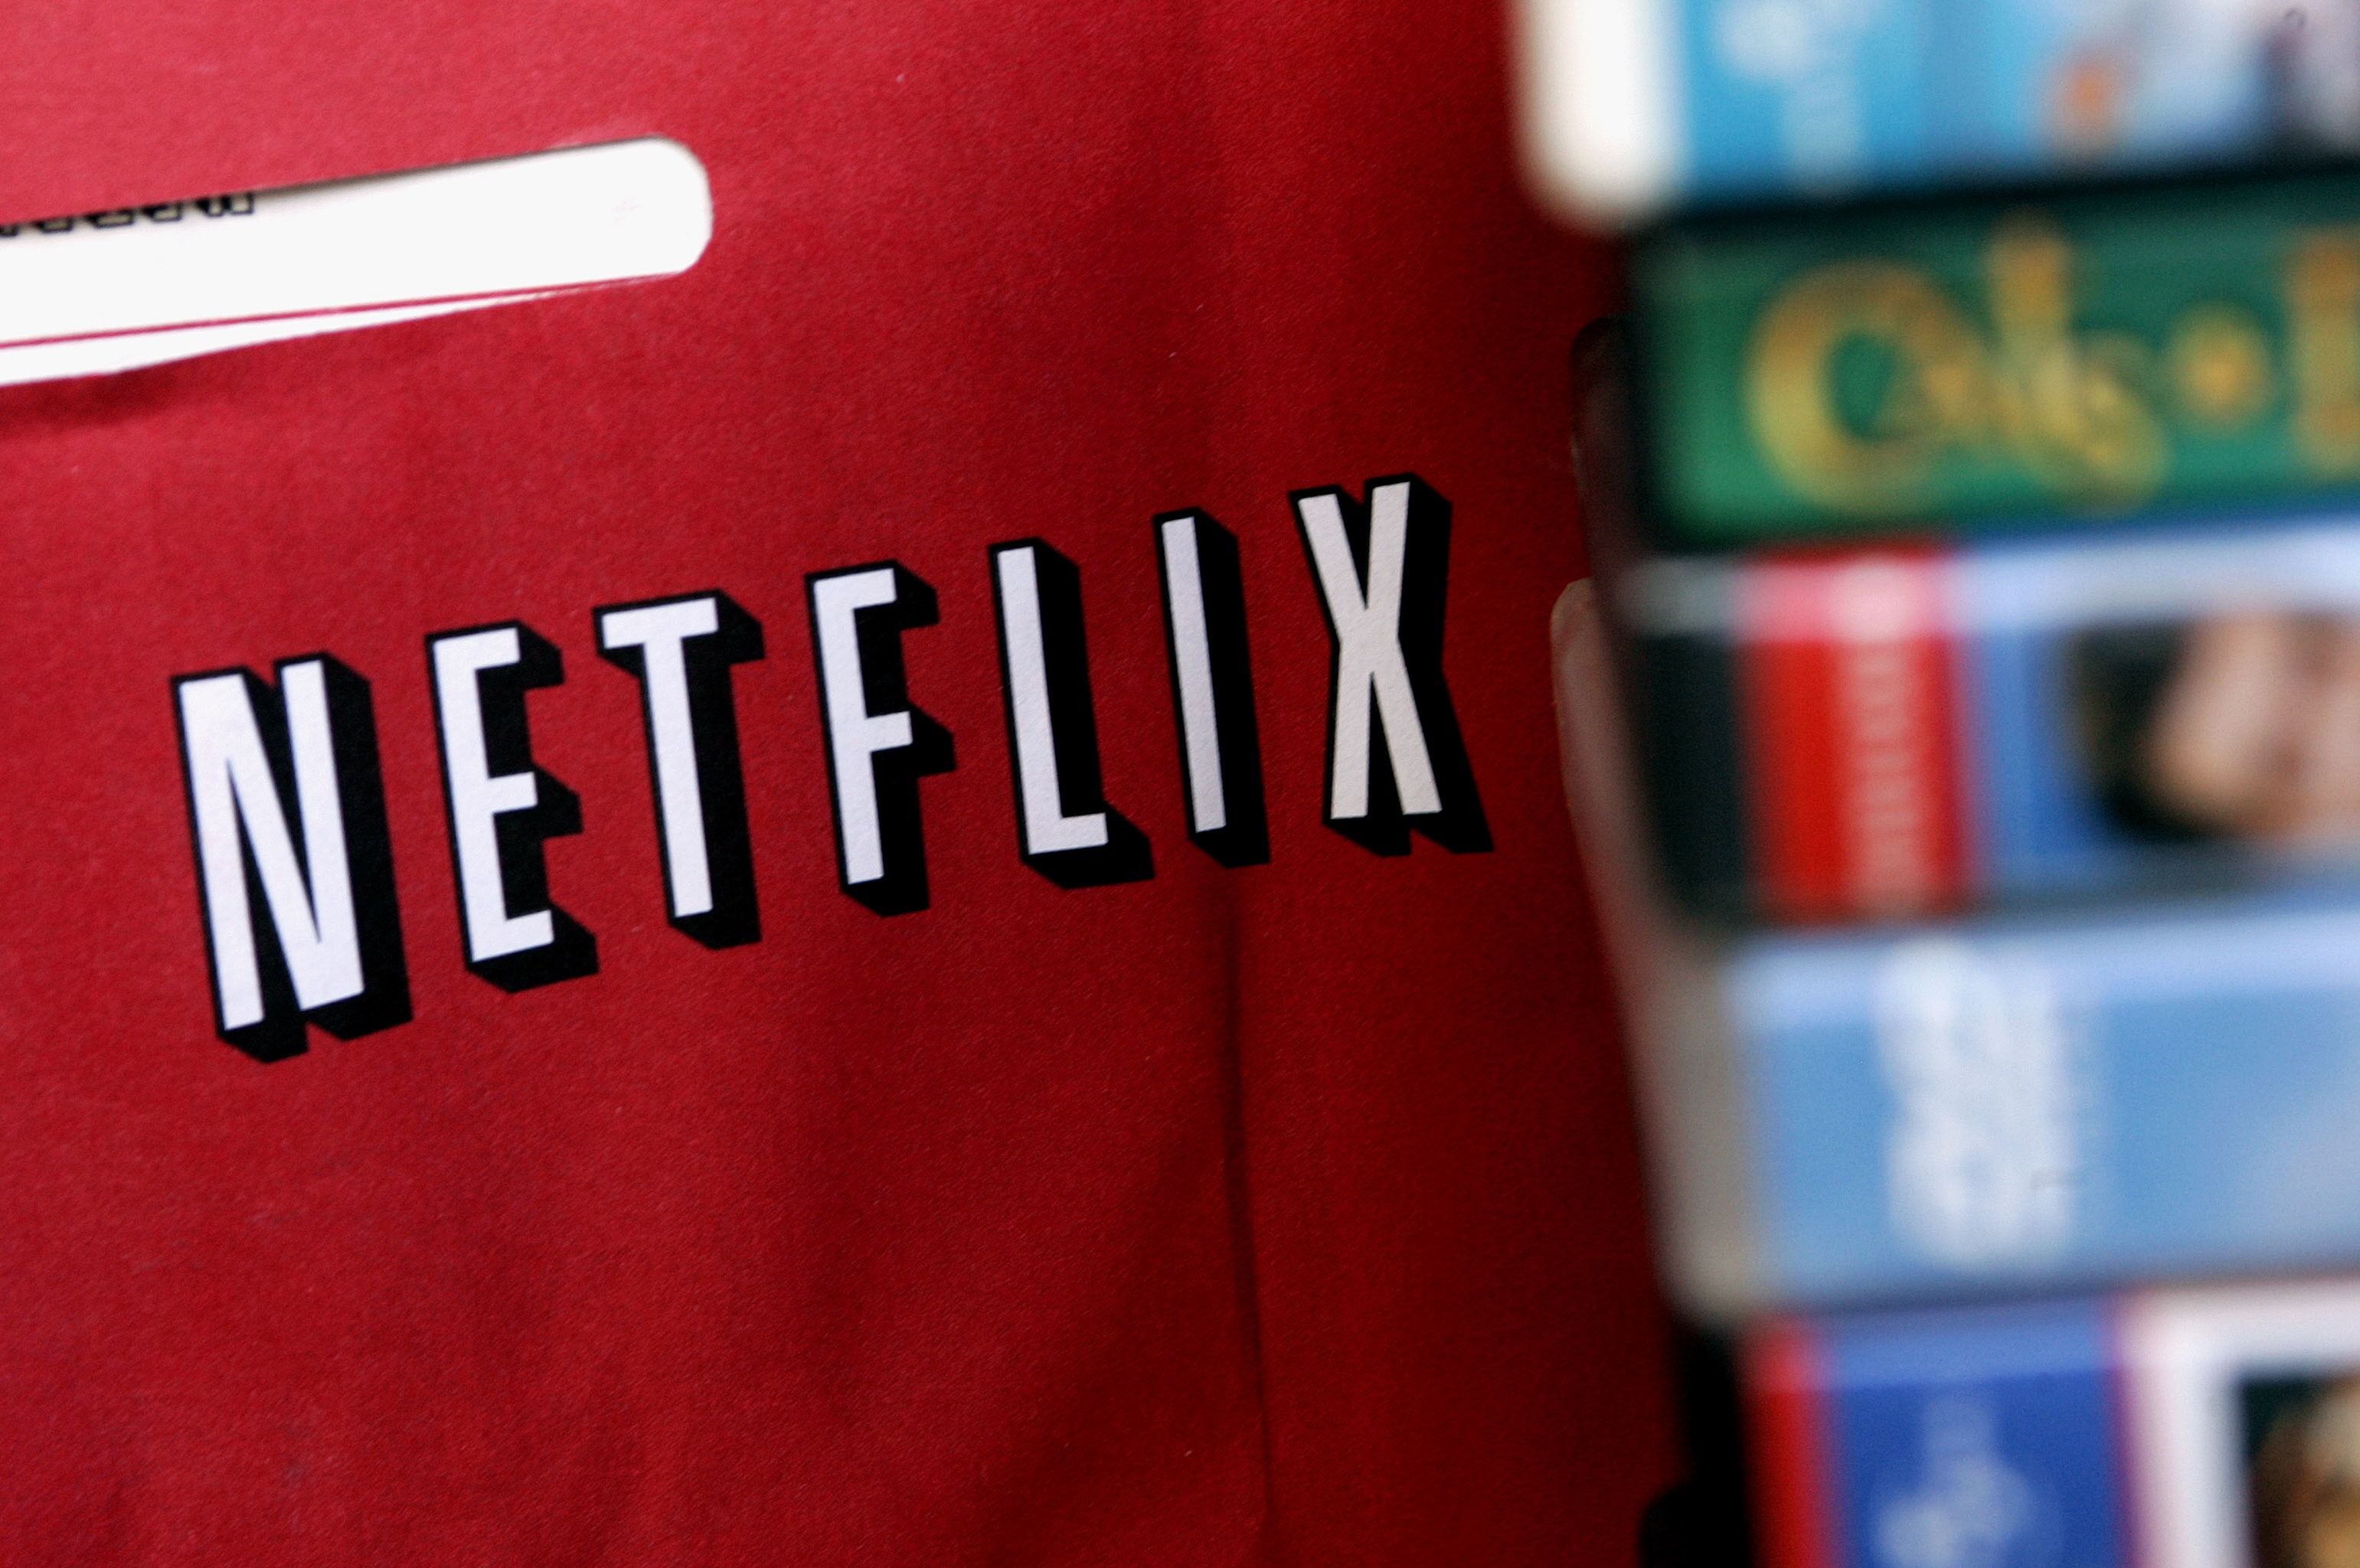 Netflix's not about the price, it's about the (lack of) choice